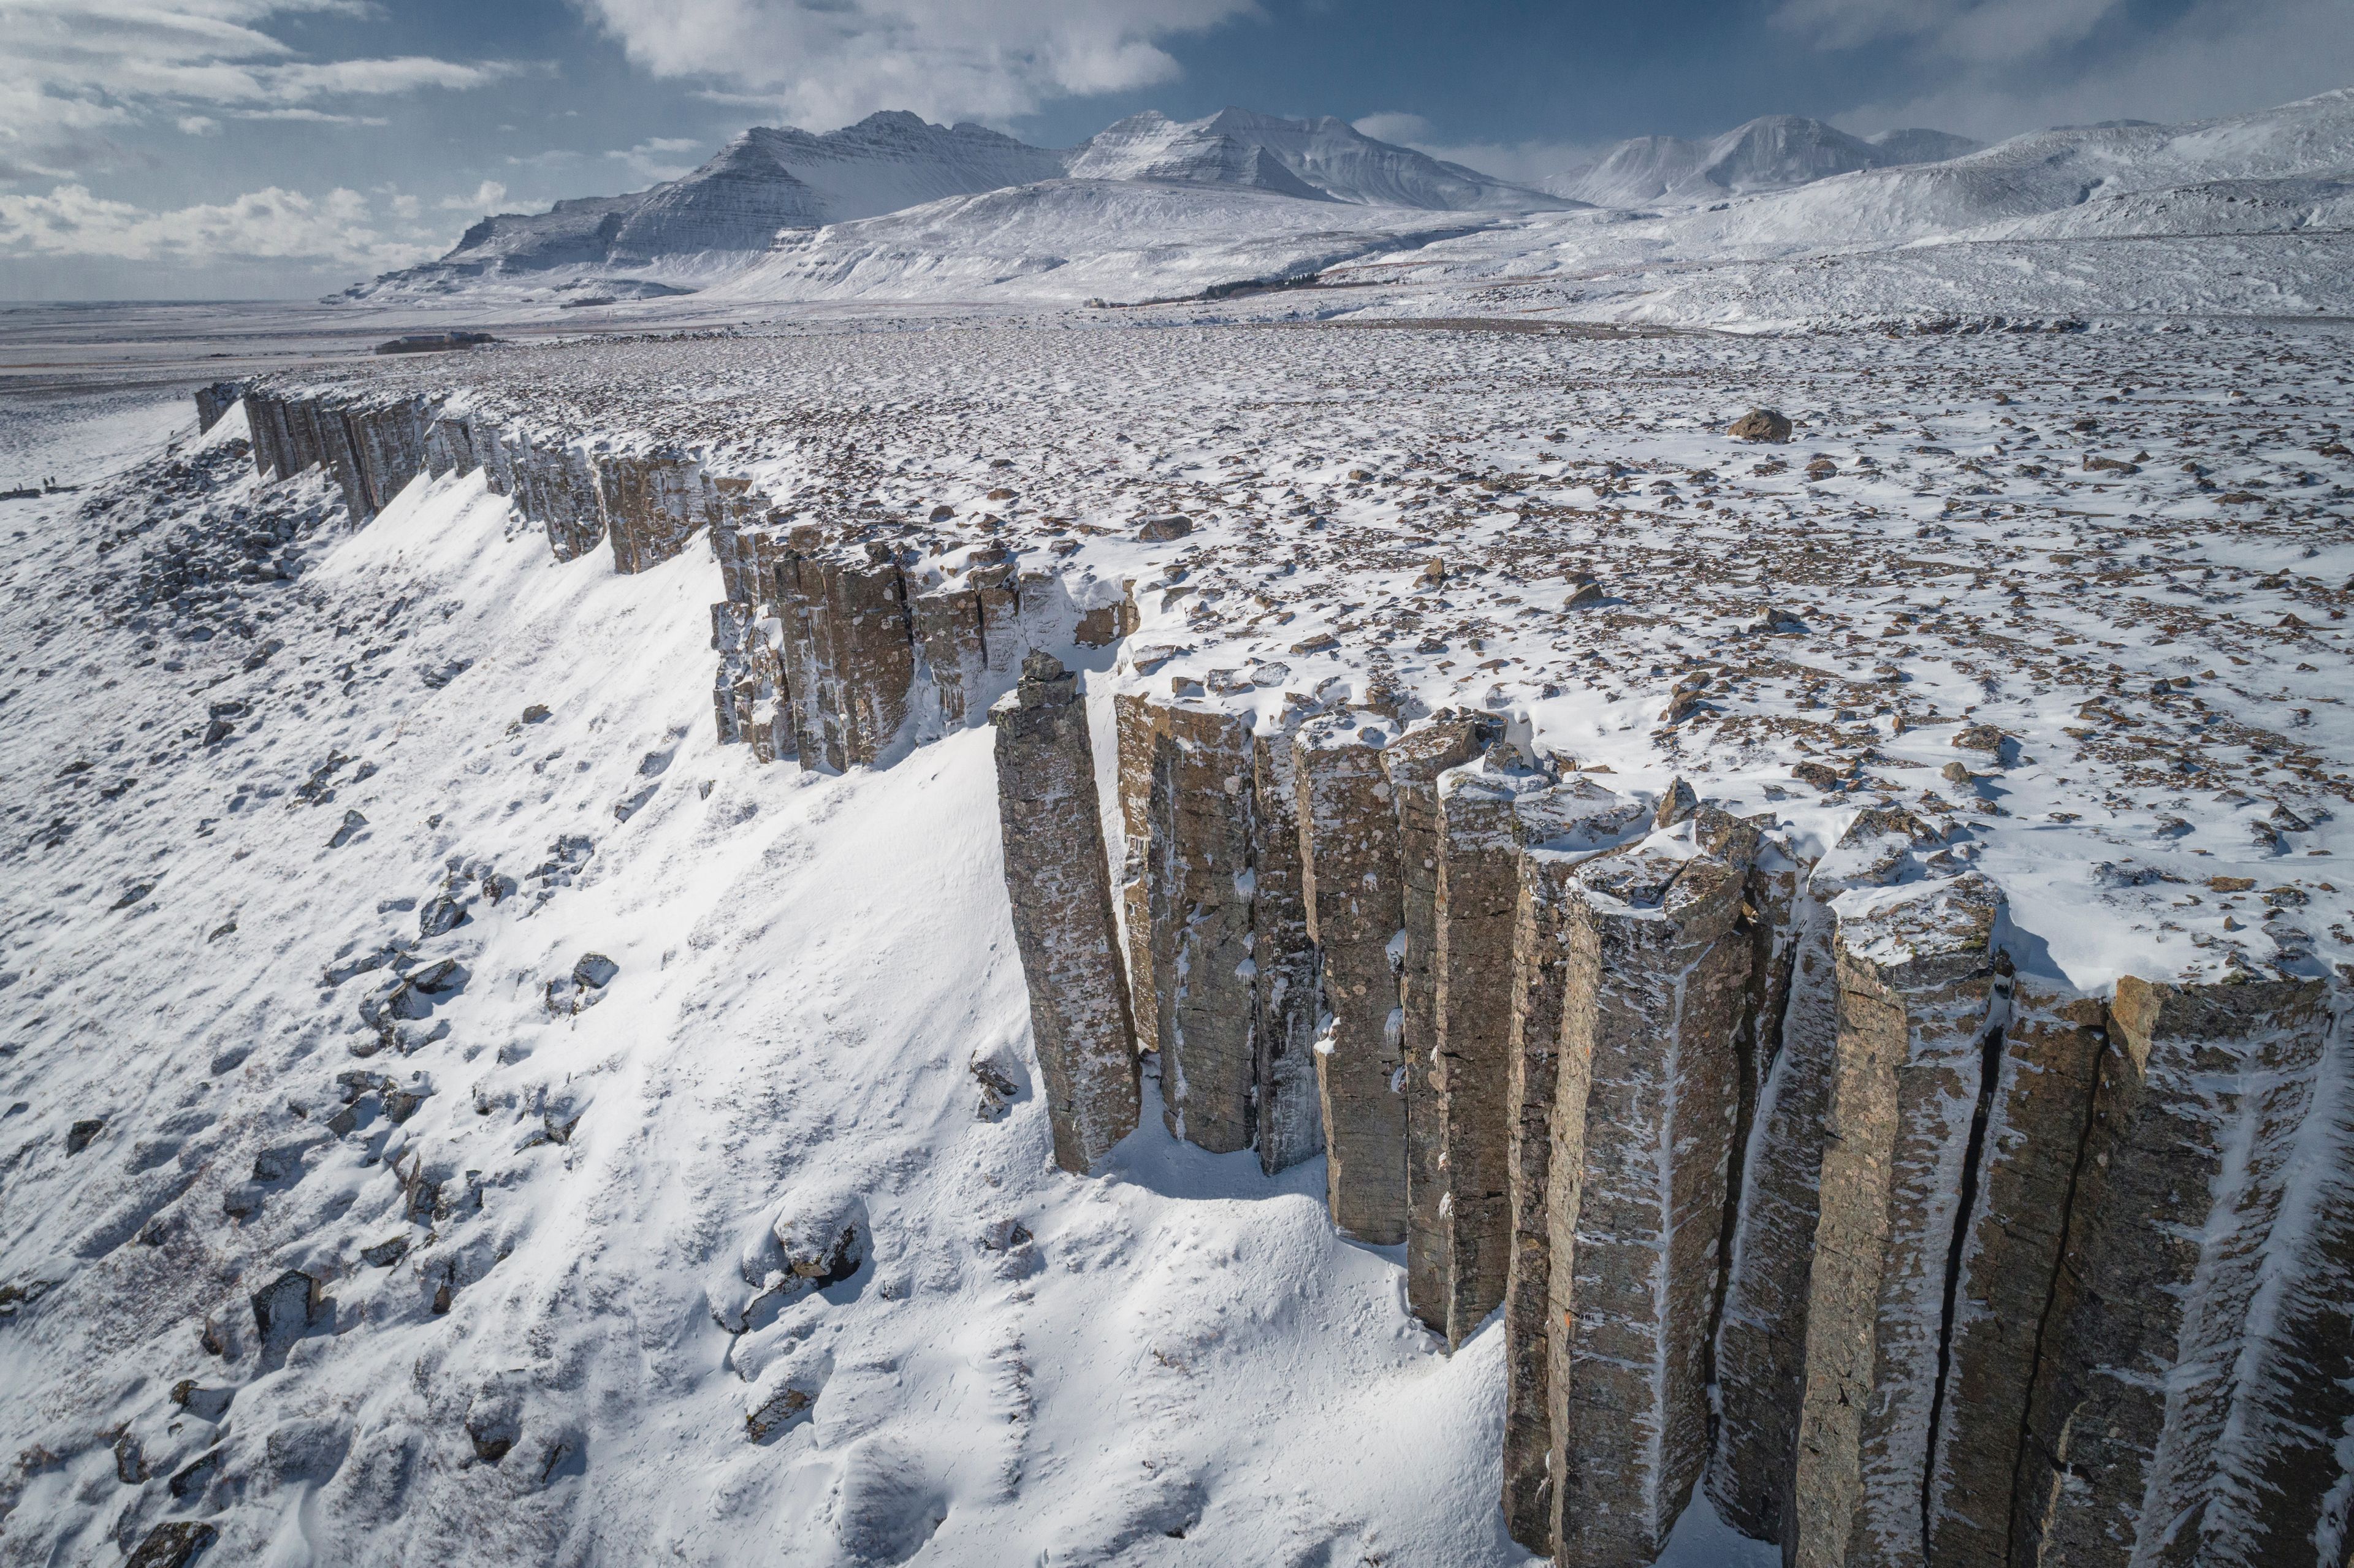 Hexagonal basalt columns at Gerðuberg cliffs with snow blanketed landscapes in the background